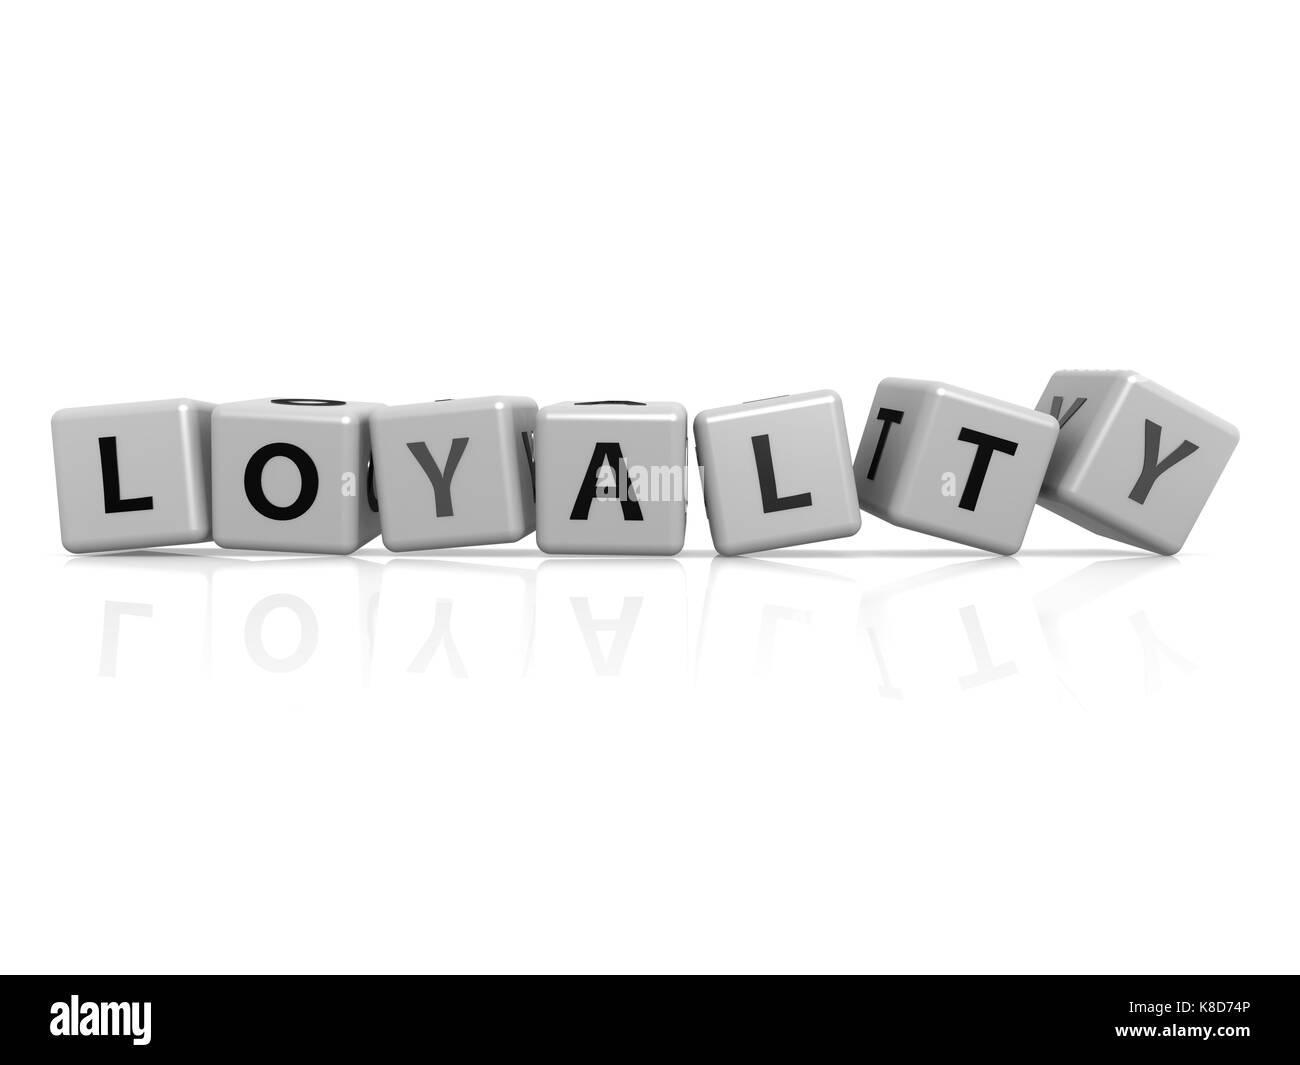 Loyalty  buzzword image with hi-res rendered artwork that could be used for any graphic design. Stock Photo